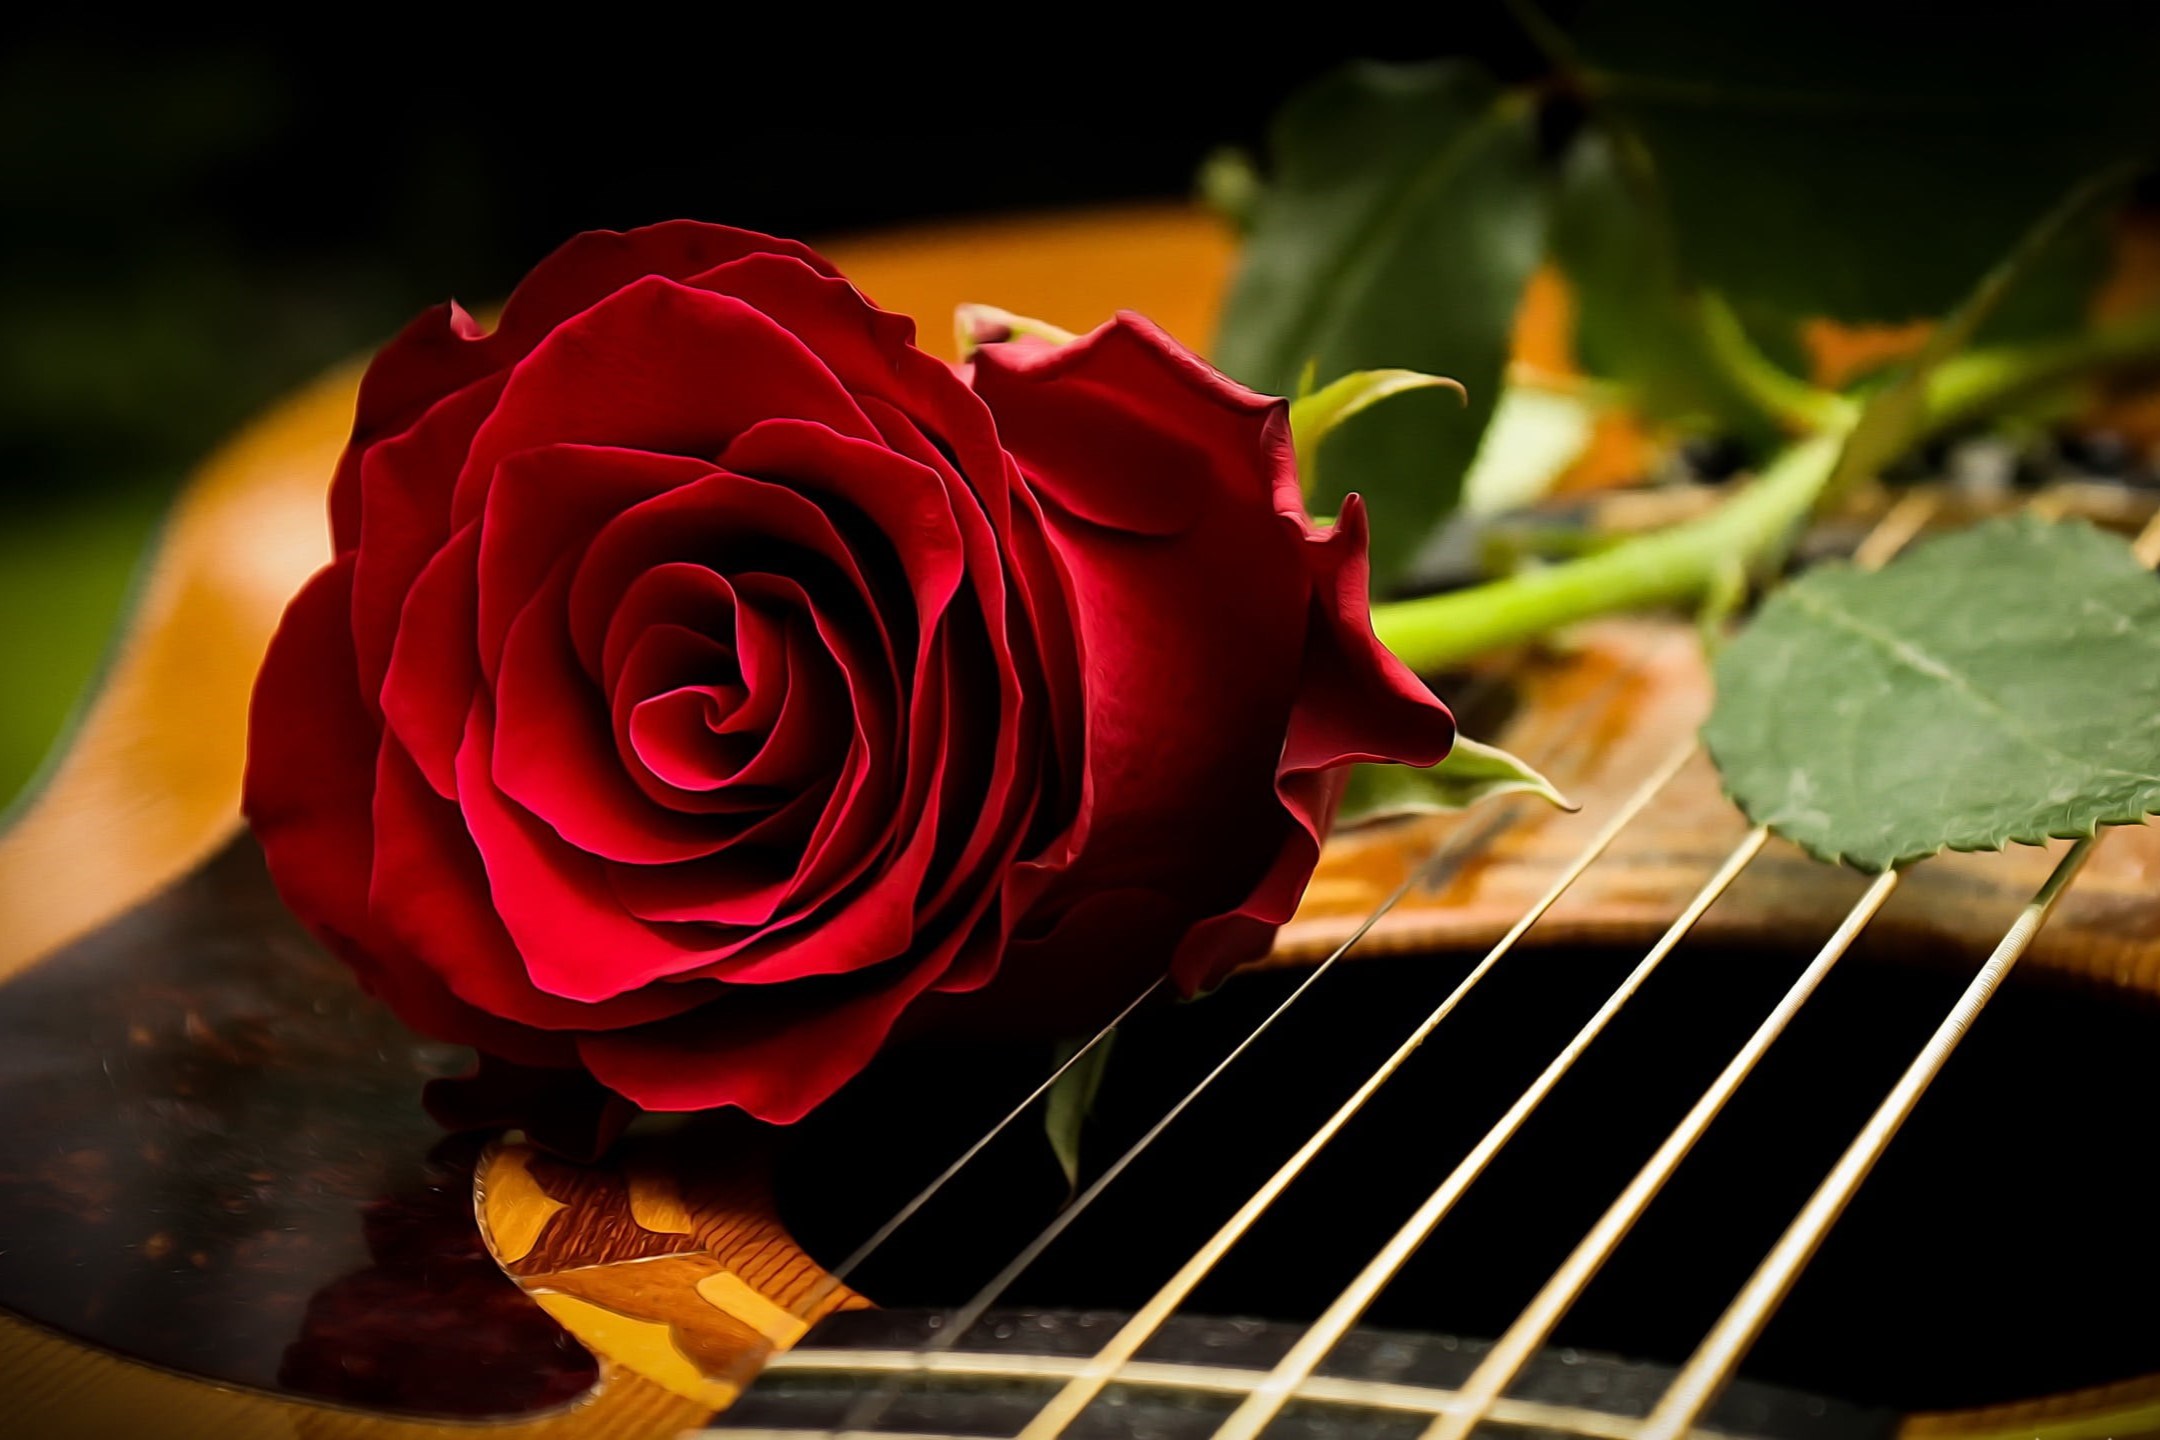 Top 10 Songs That Bloom With The Word 'Flowers' - A Melodic Garden Of Musical Delights!